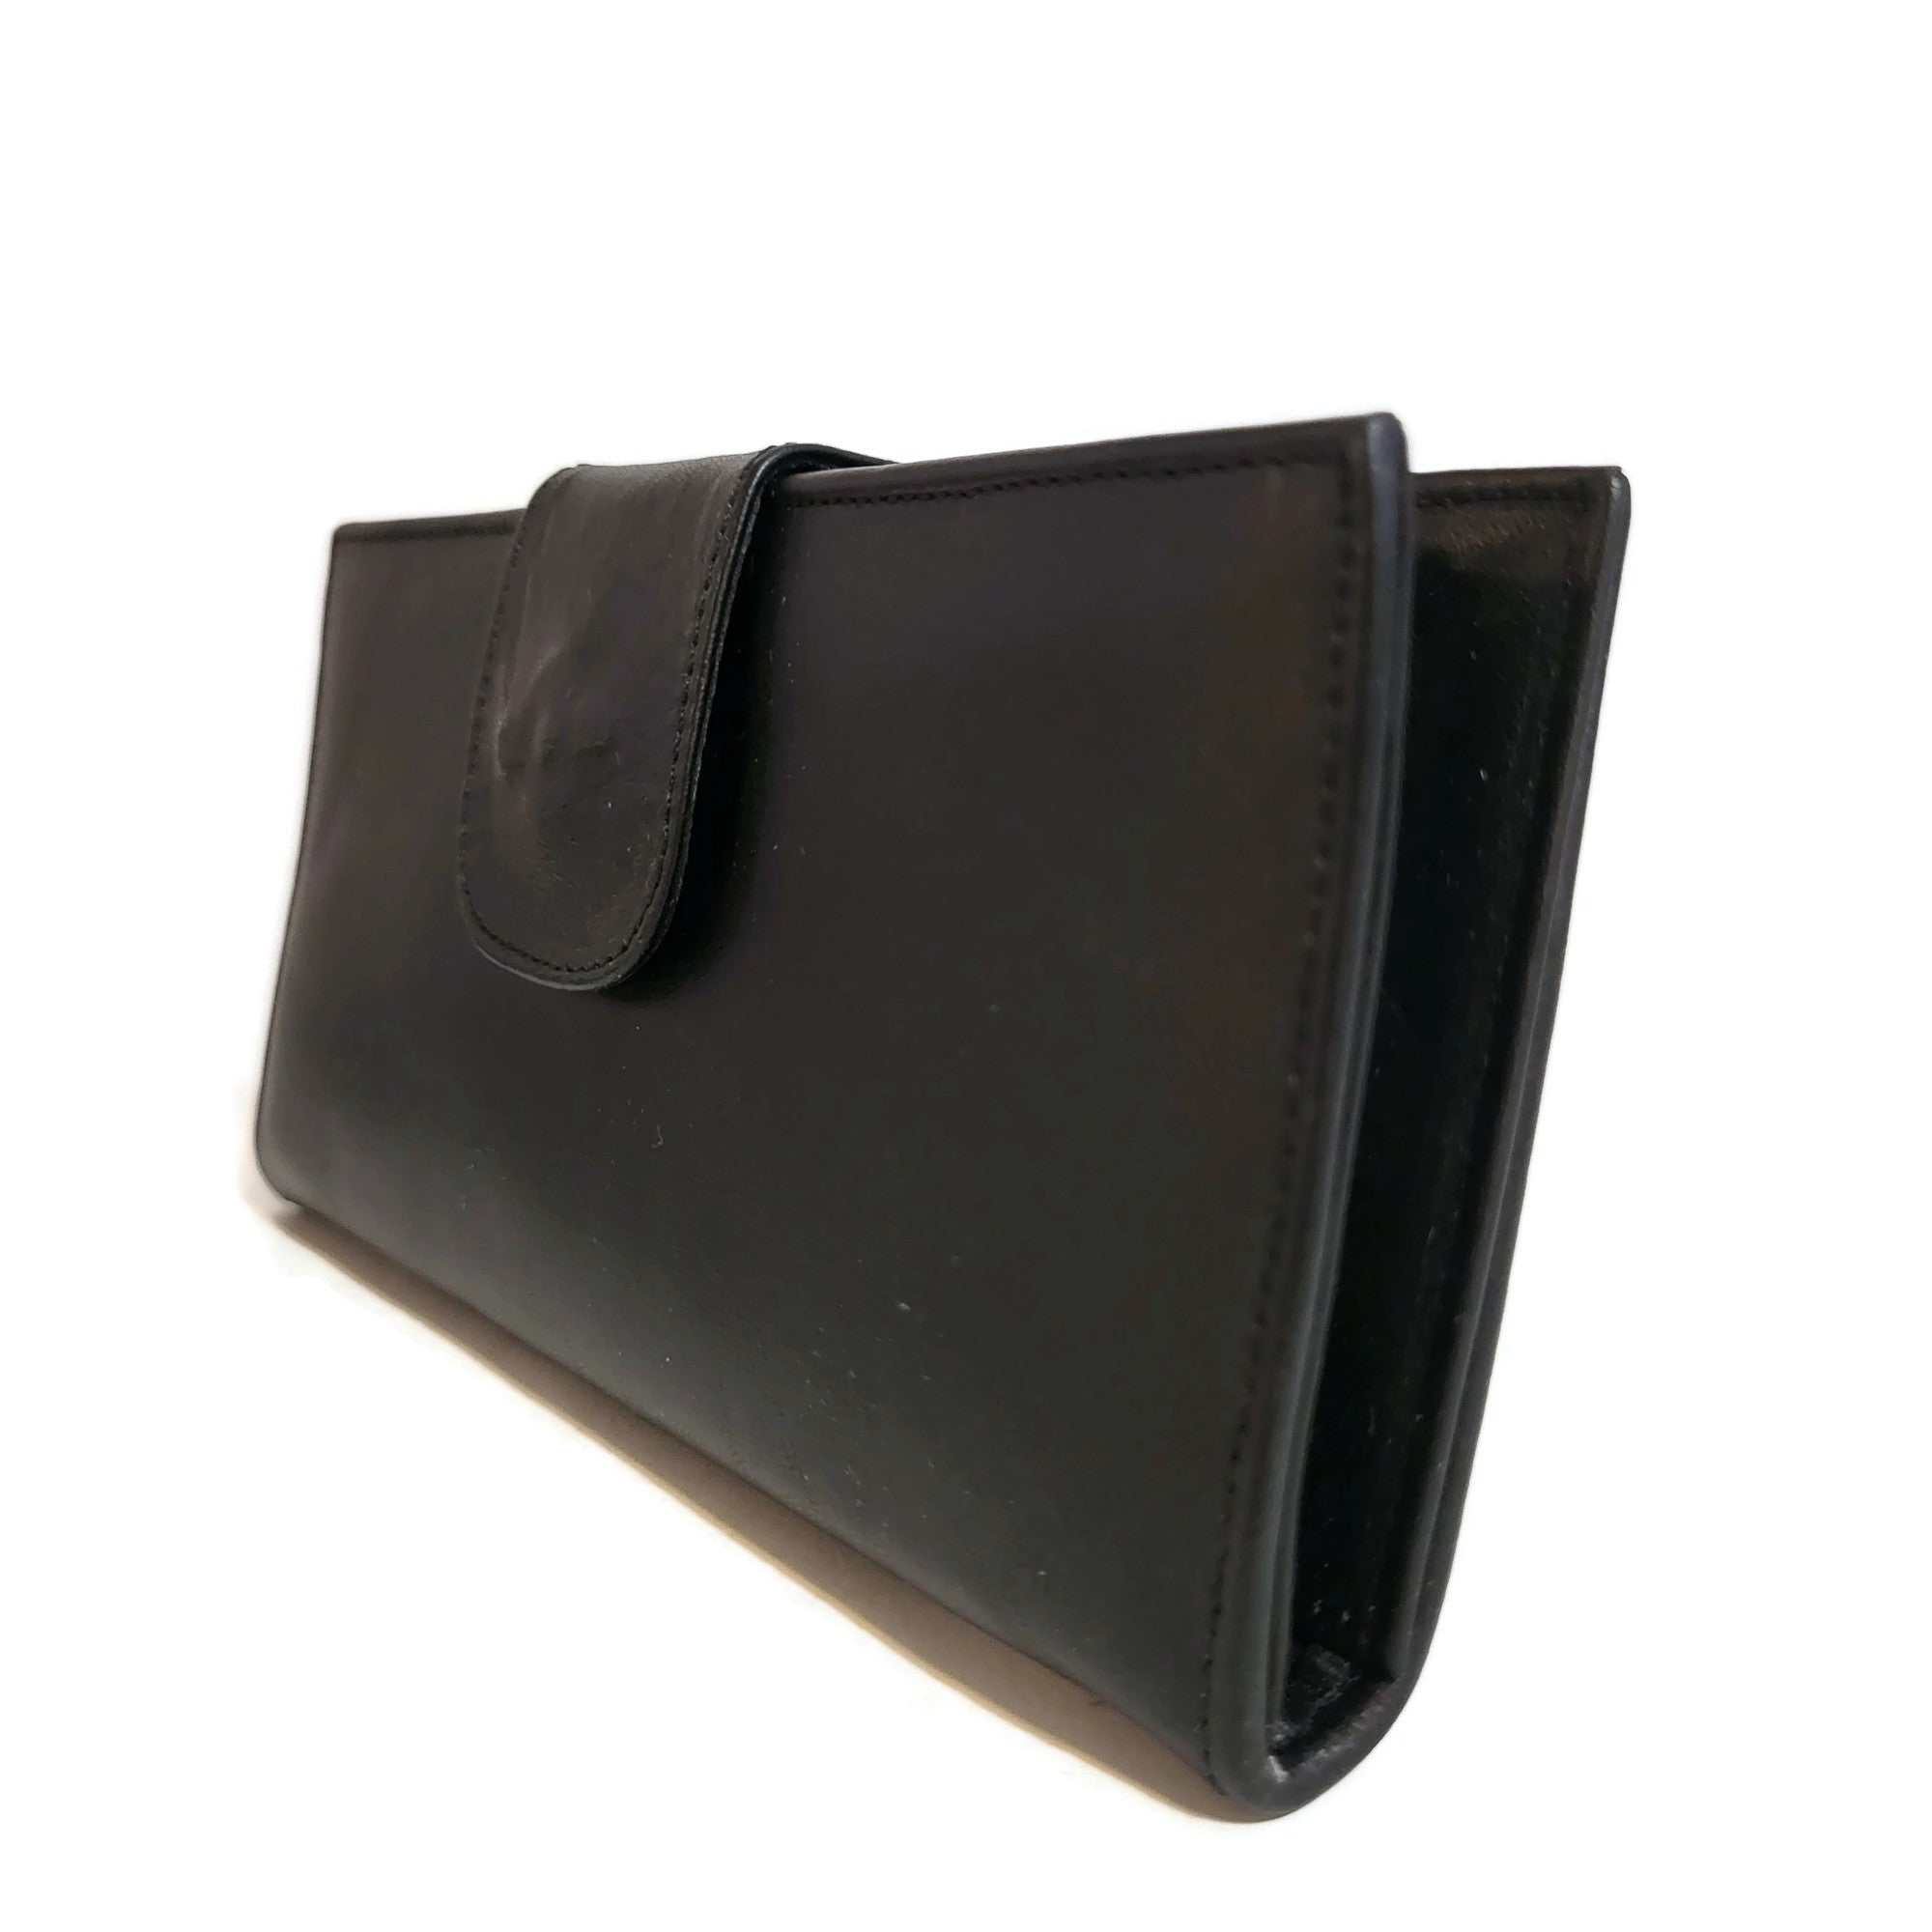 Large leather wallet for woman, with zipper